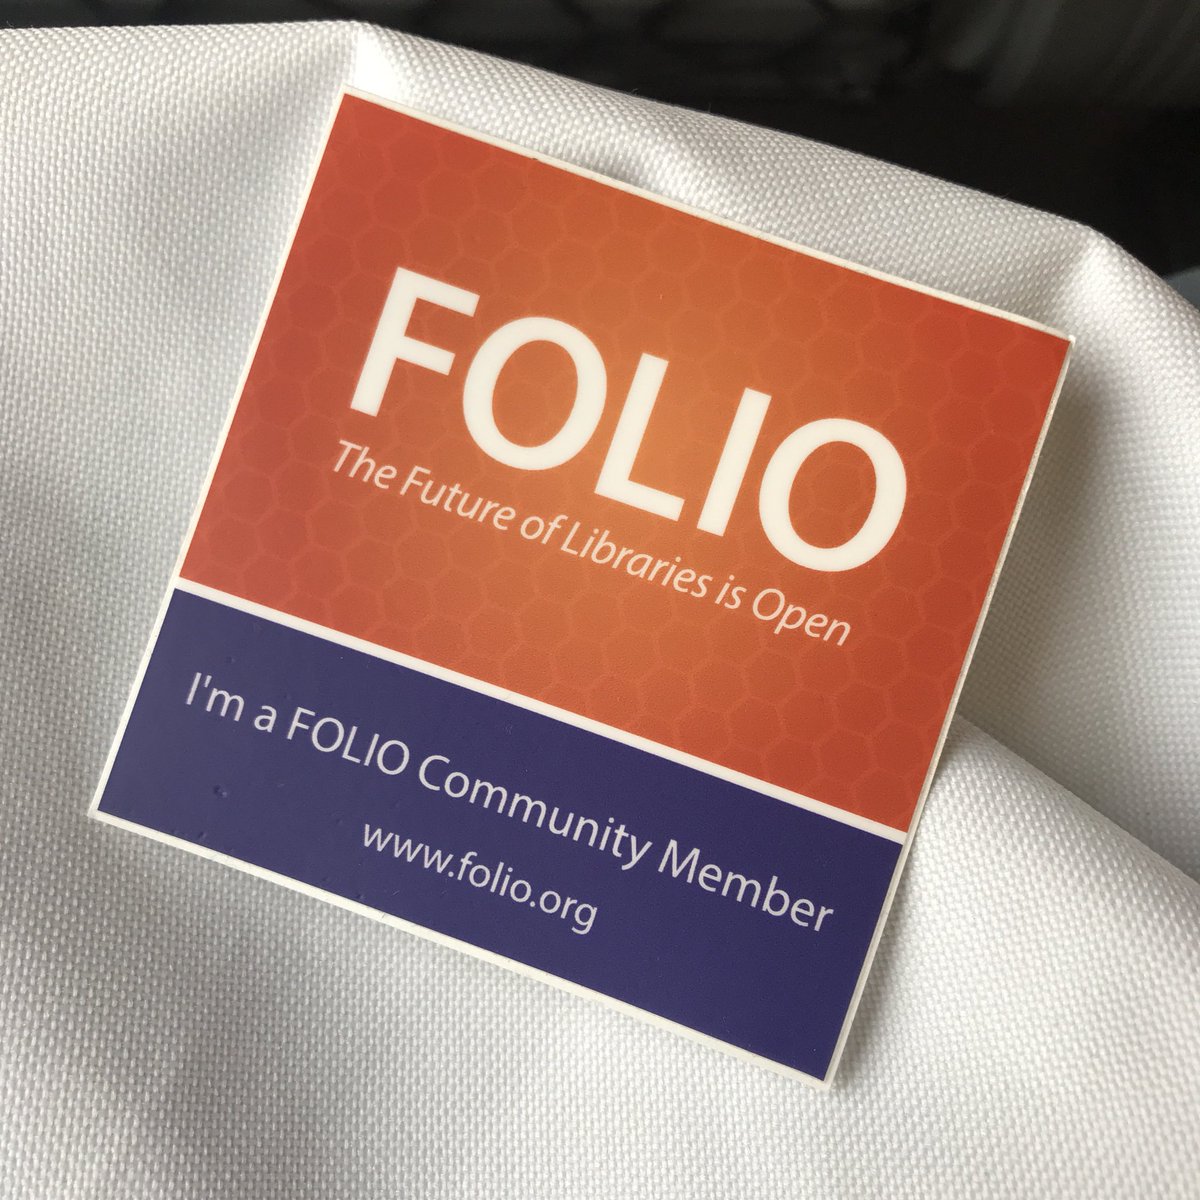 @FOLIO_LSP swag received, #FOLIODay attended, meetings had. It was great meeting all the people from the community in person.